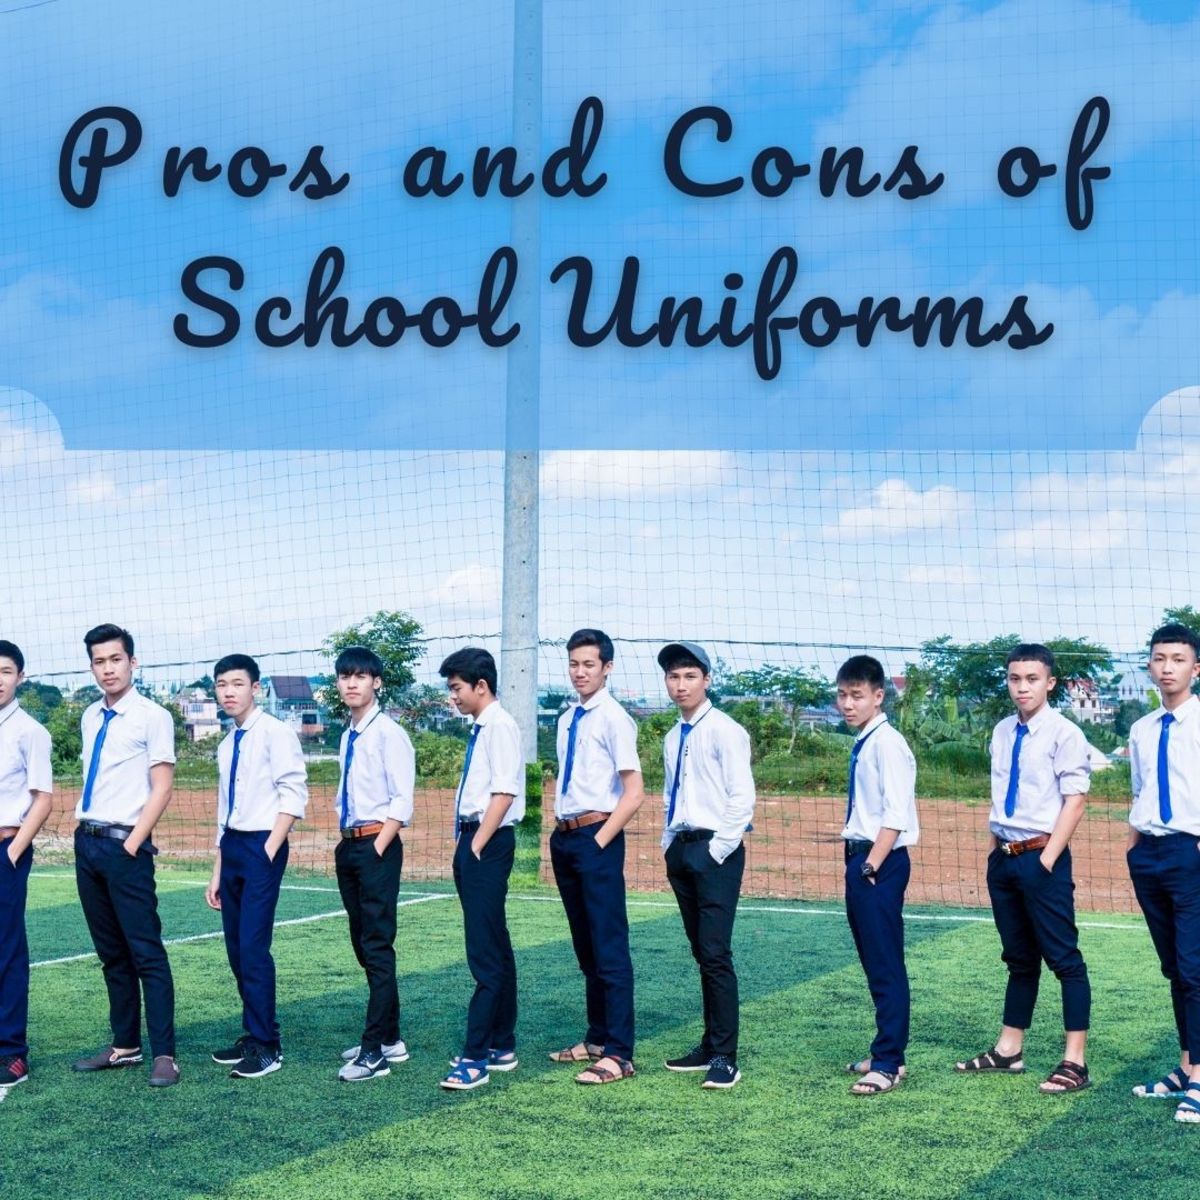 An assessment of the advantages and disadvantages of school uniforms